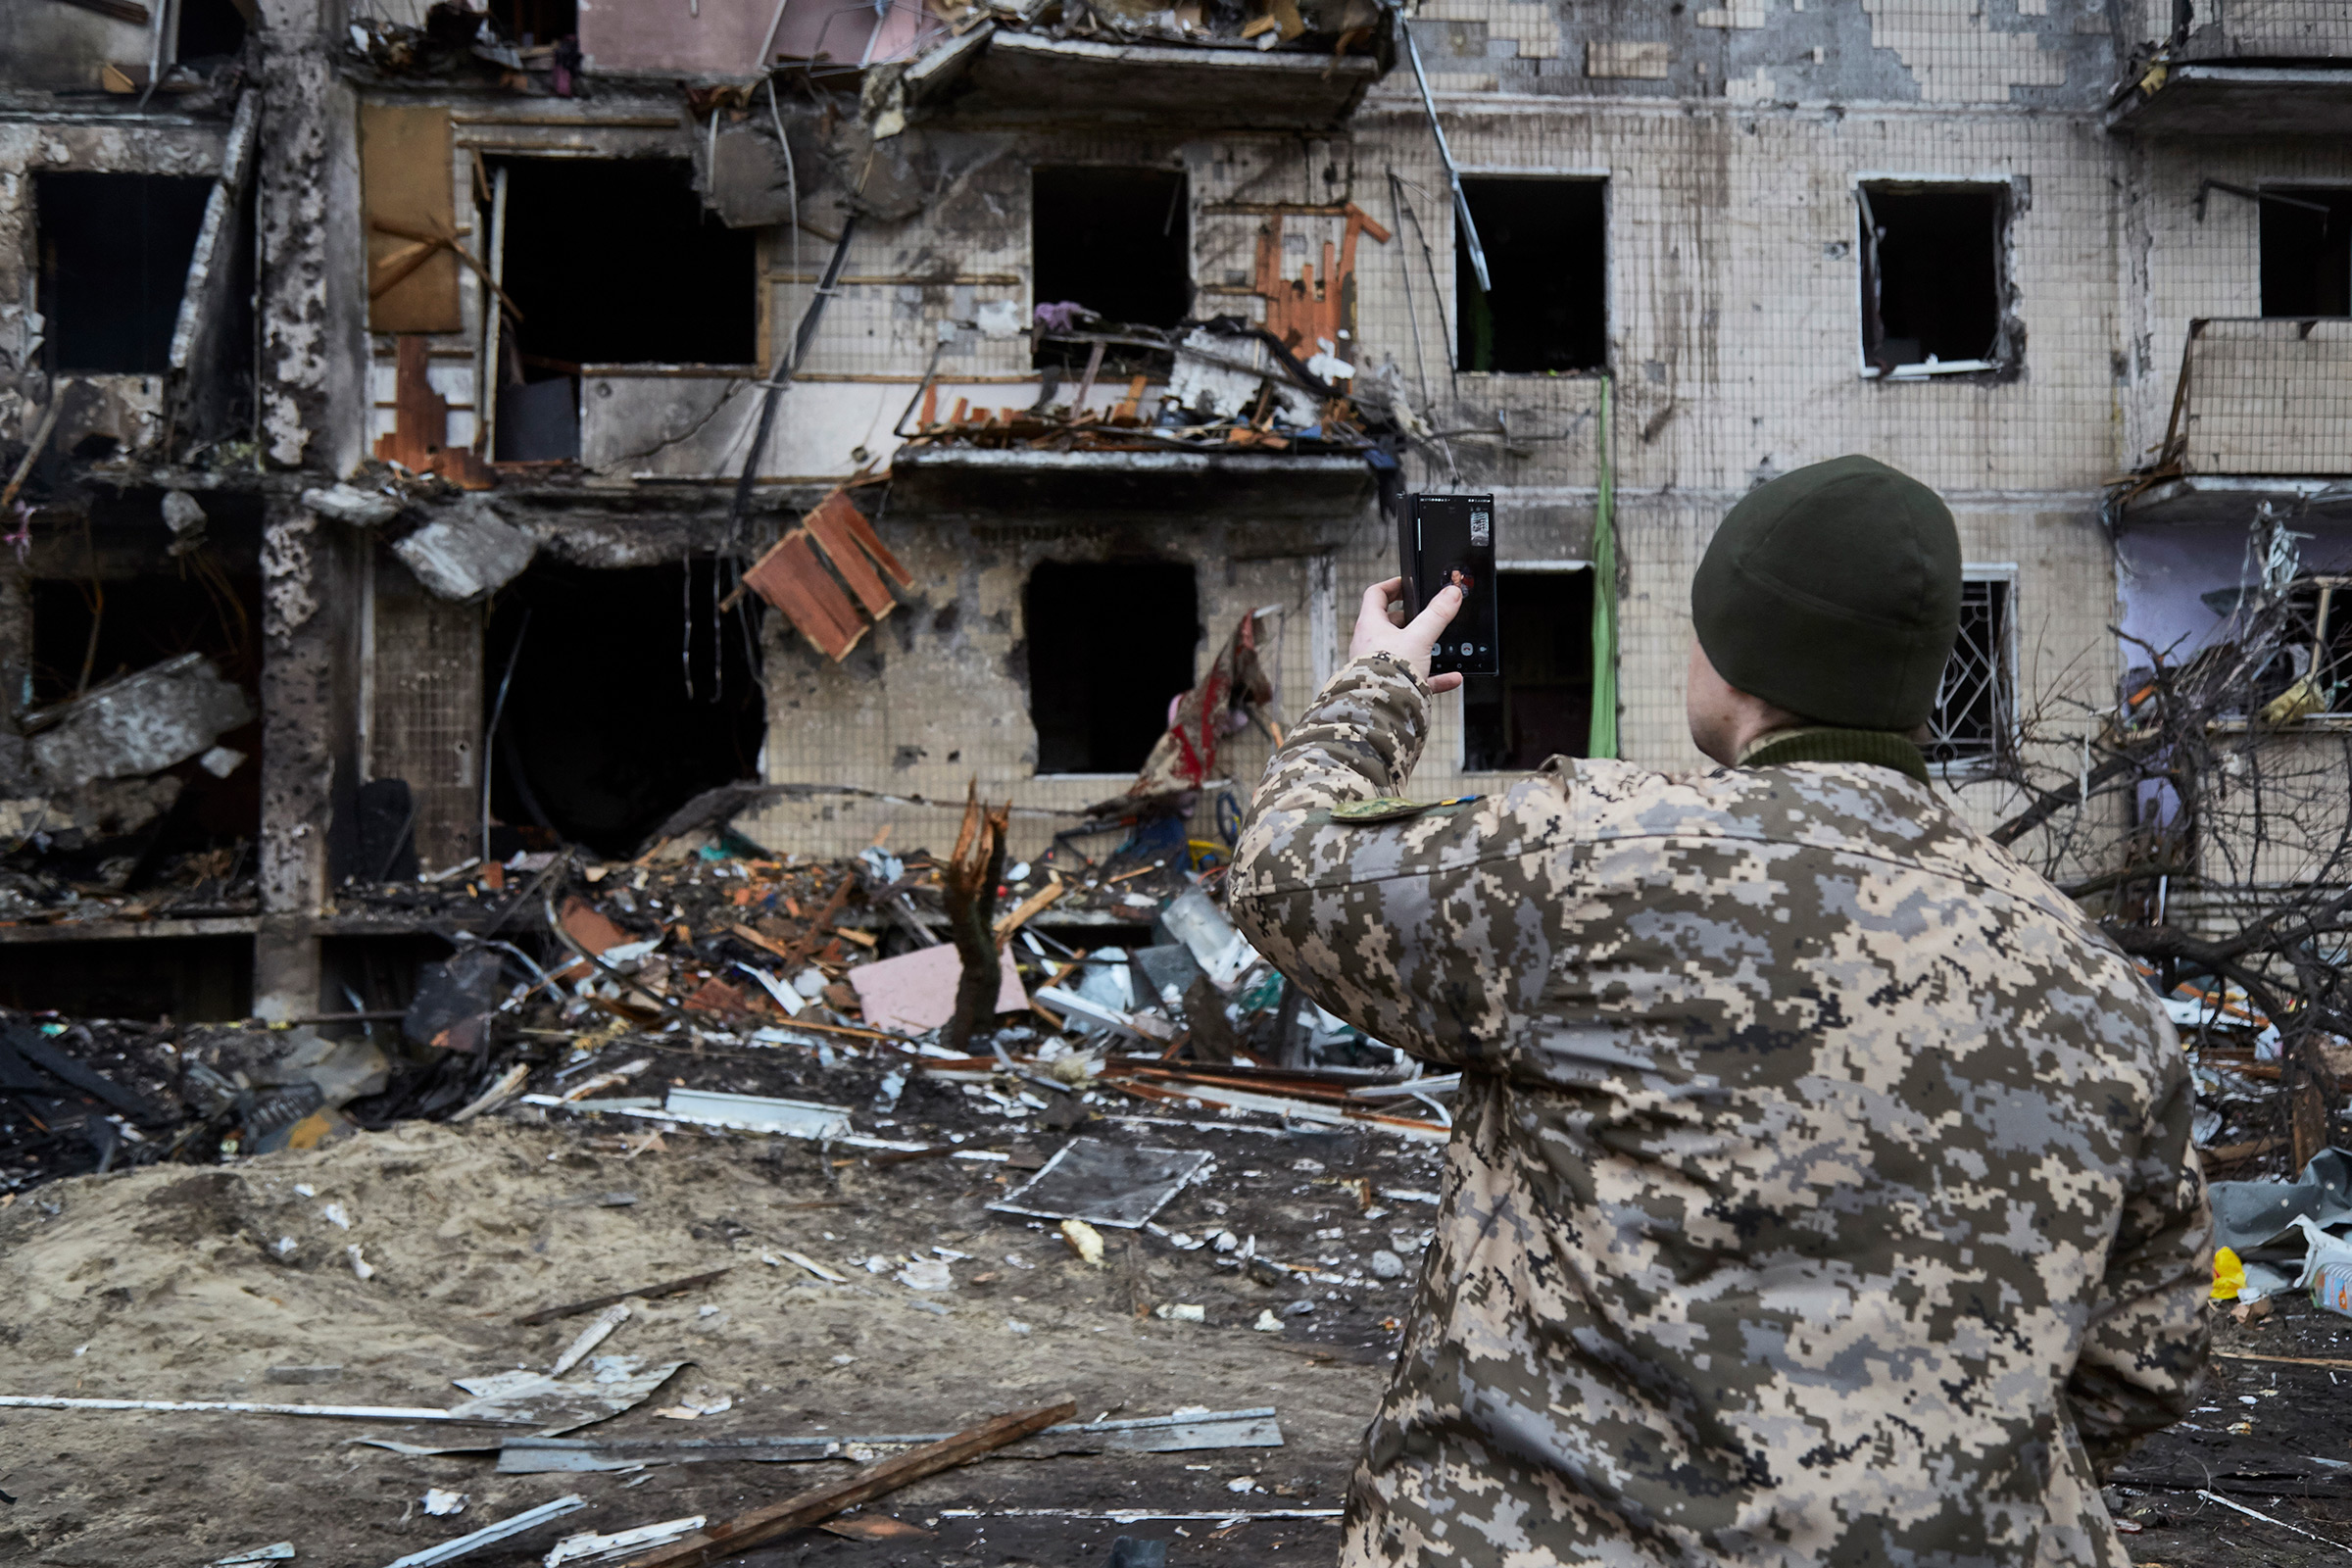 A Ukrainian soldier speaks on his smartphone outside a residential building damaged by a missile in Kyiv, Ukraine, on Feb. 25, 2022.